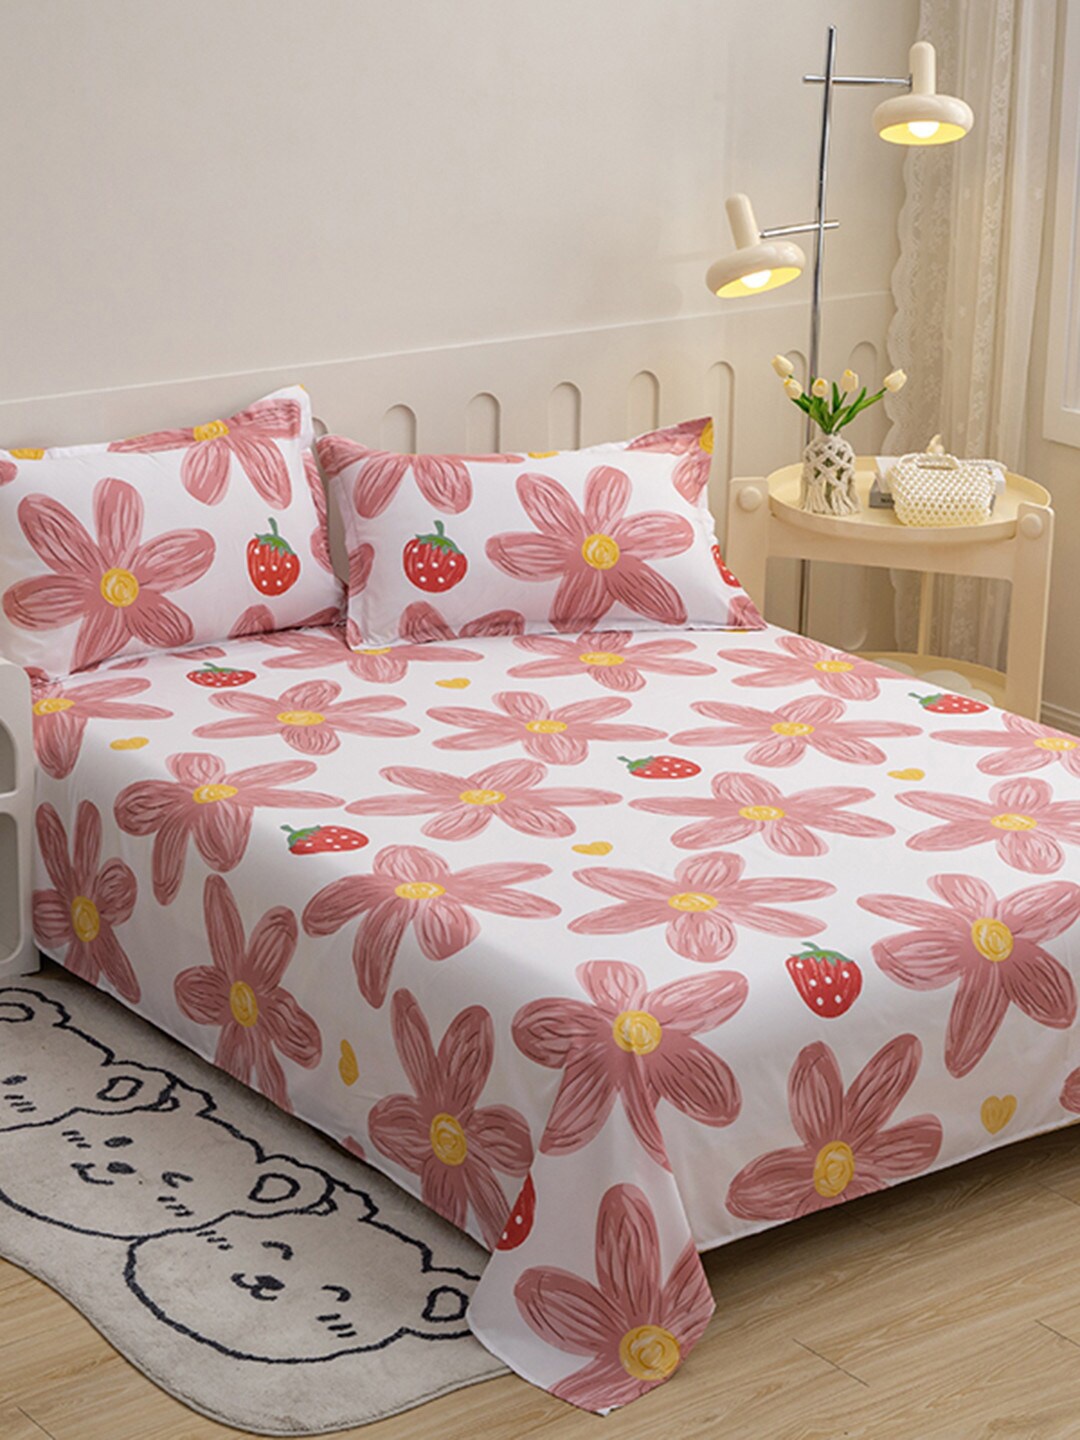 

JC HOME Pink & White Floral Printed 140 TC Single Bedsheet & Pillow Cover